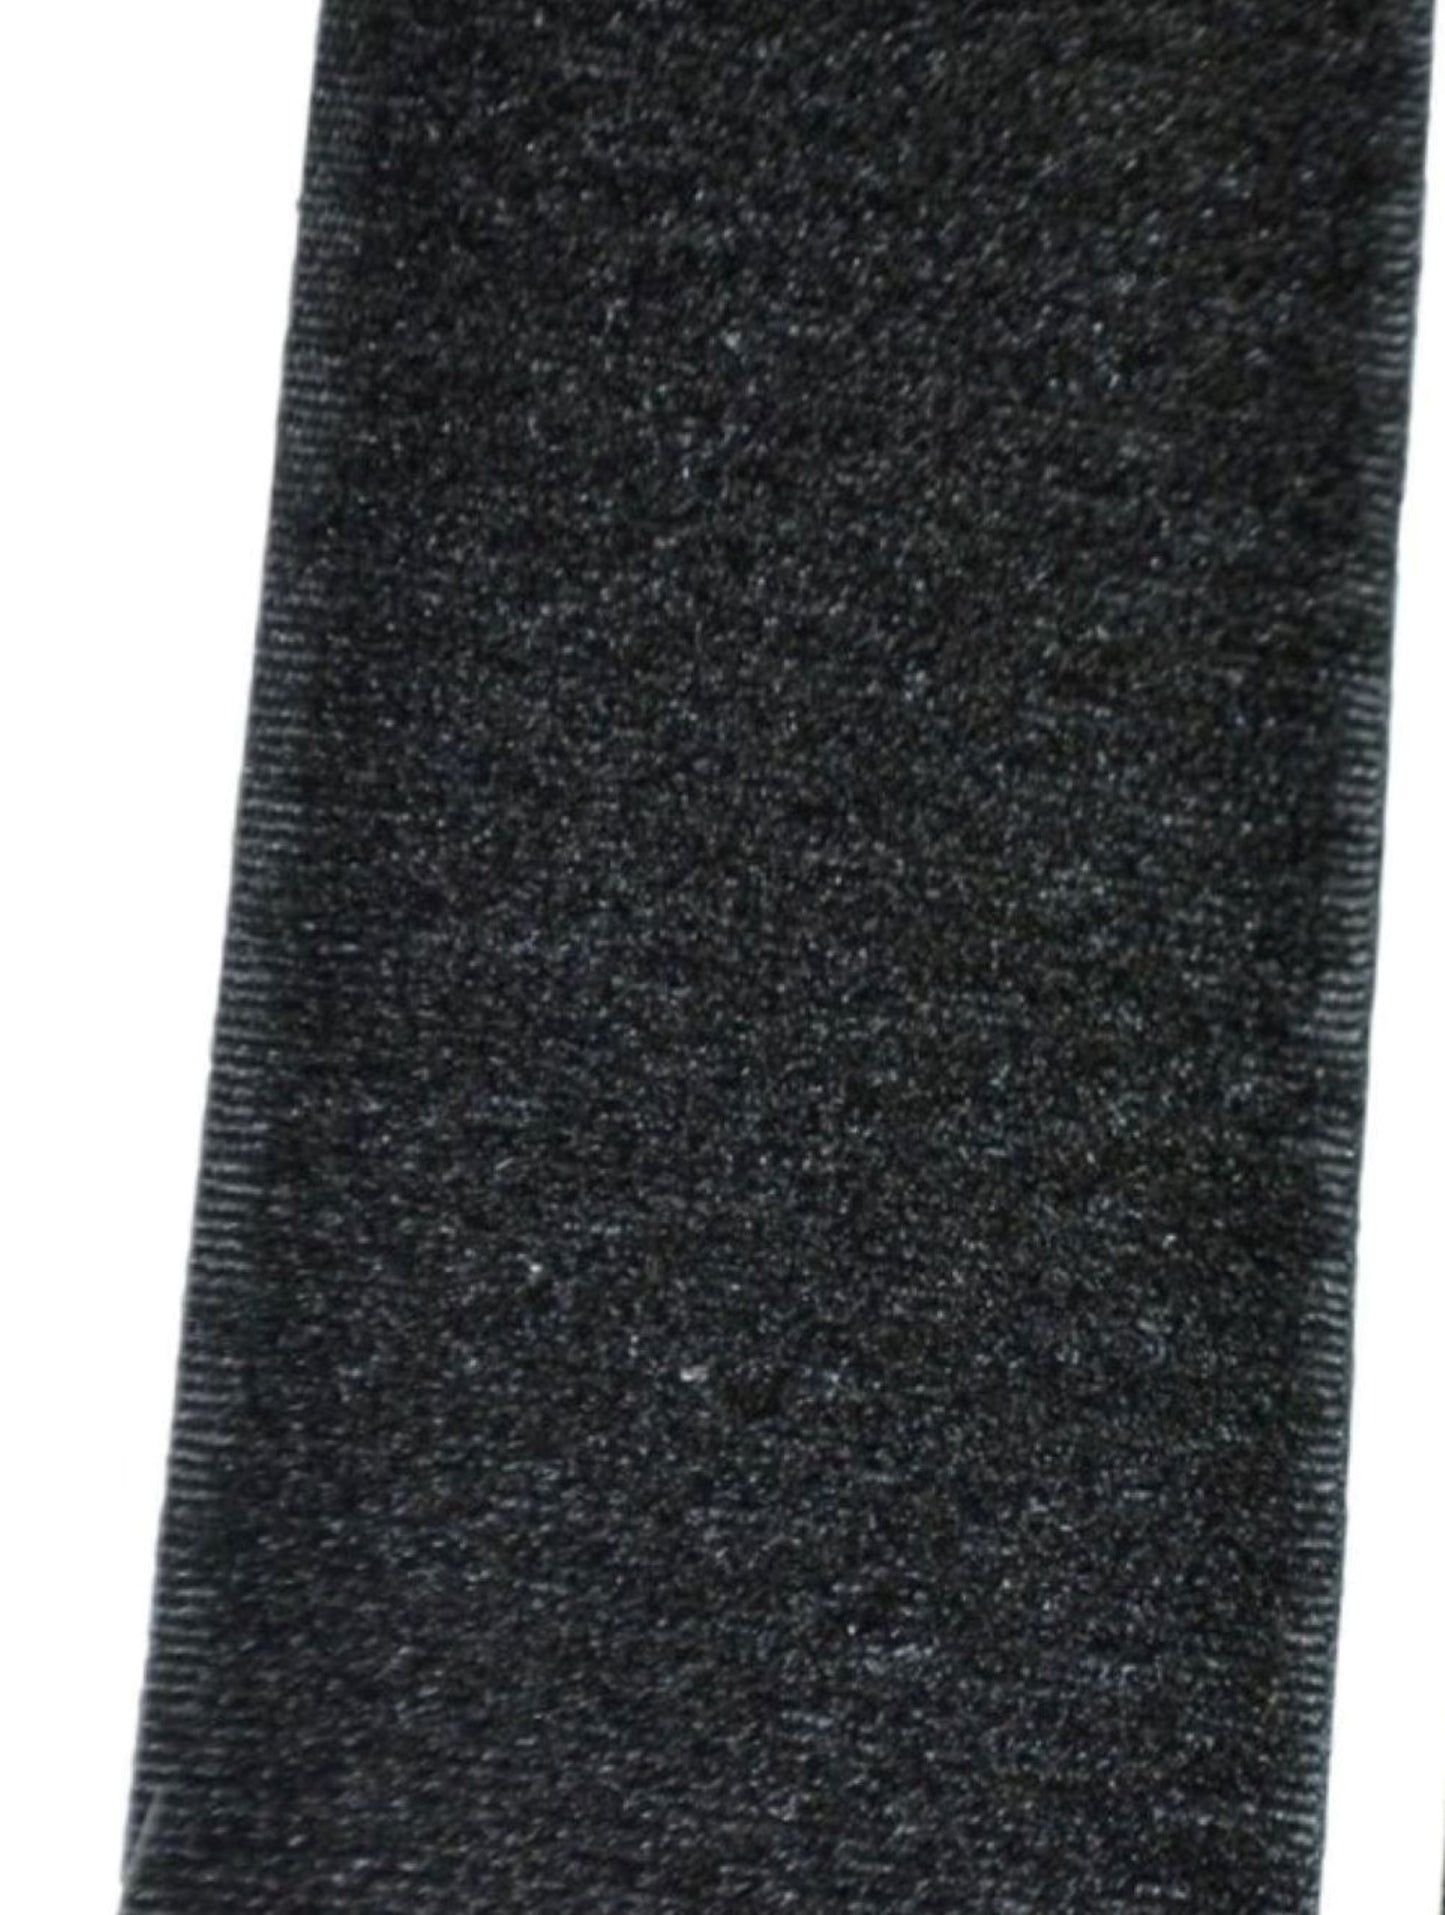 Sew on velcro loop 38 mm black, The Solution Shop